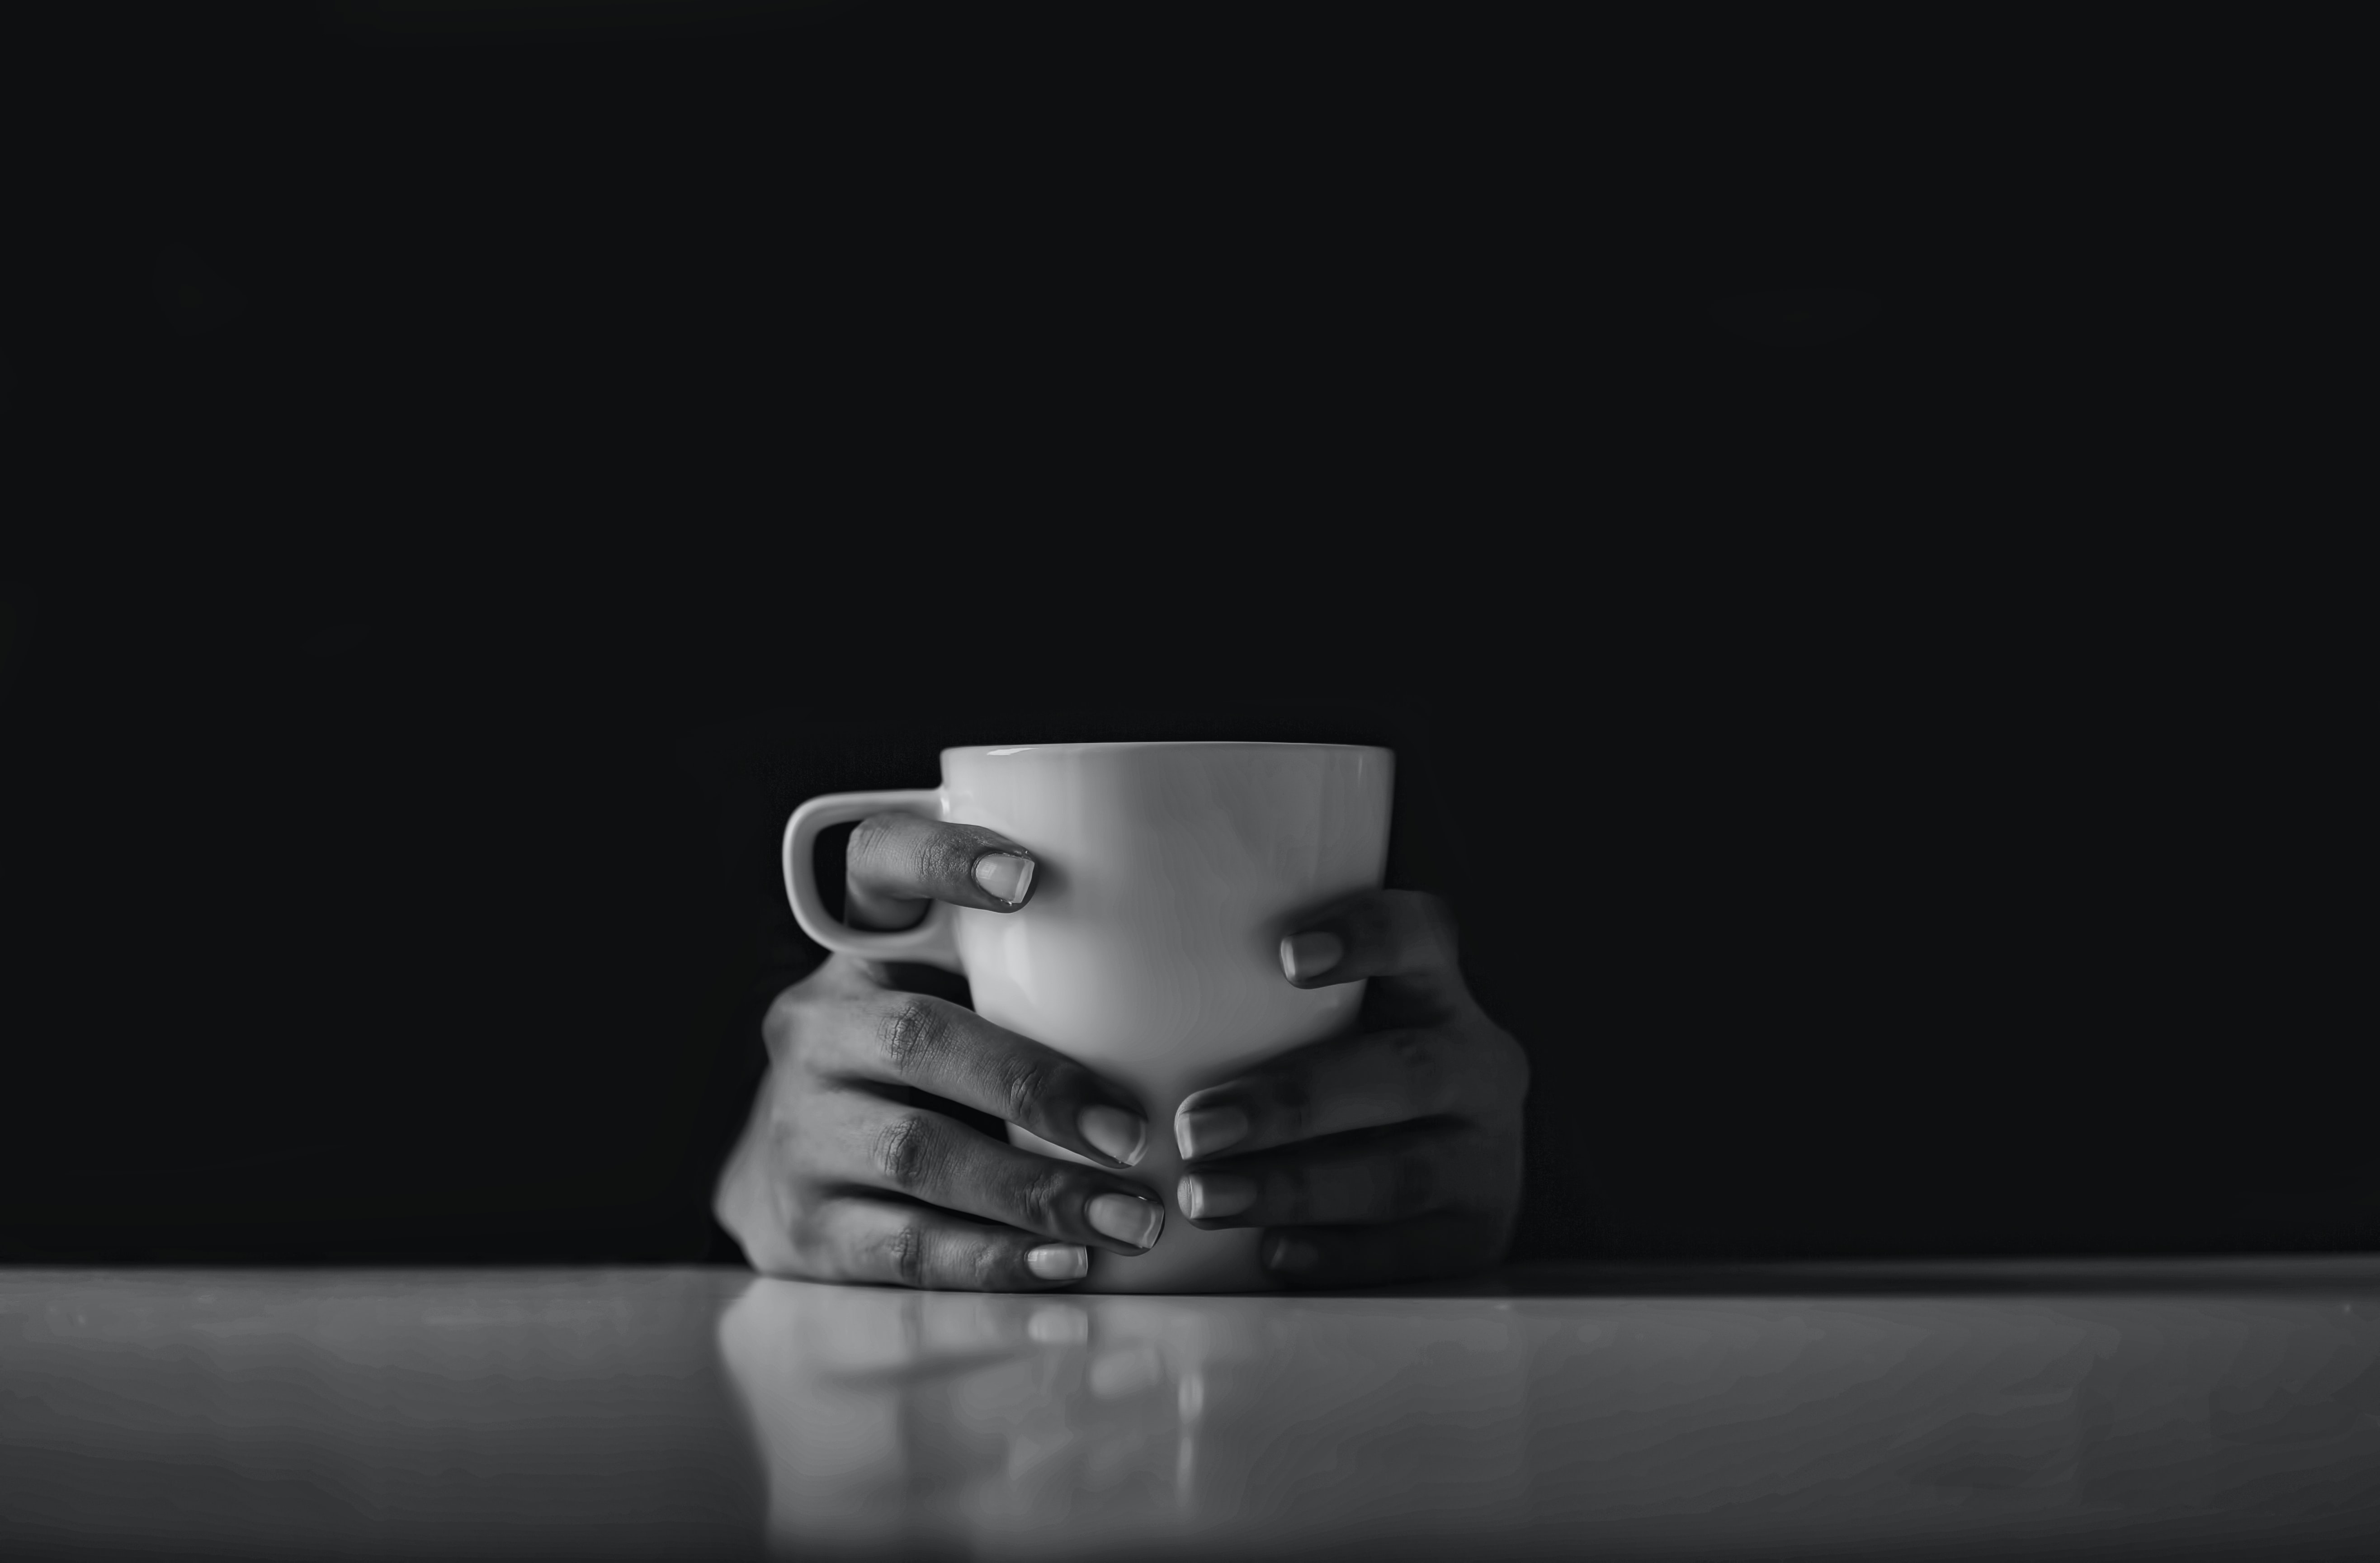 hands, bw, miscellanea, miscellaneous, cup, chb, drink, beverage 1080p